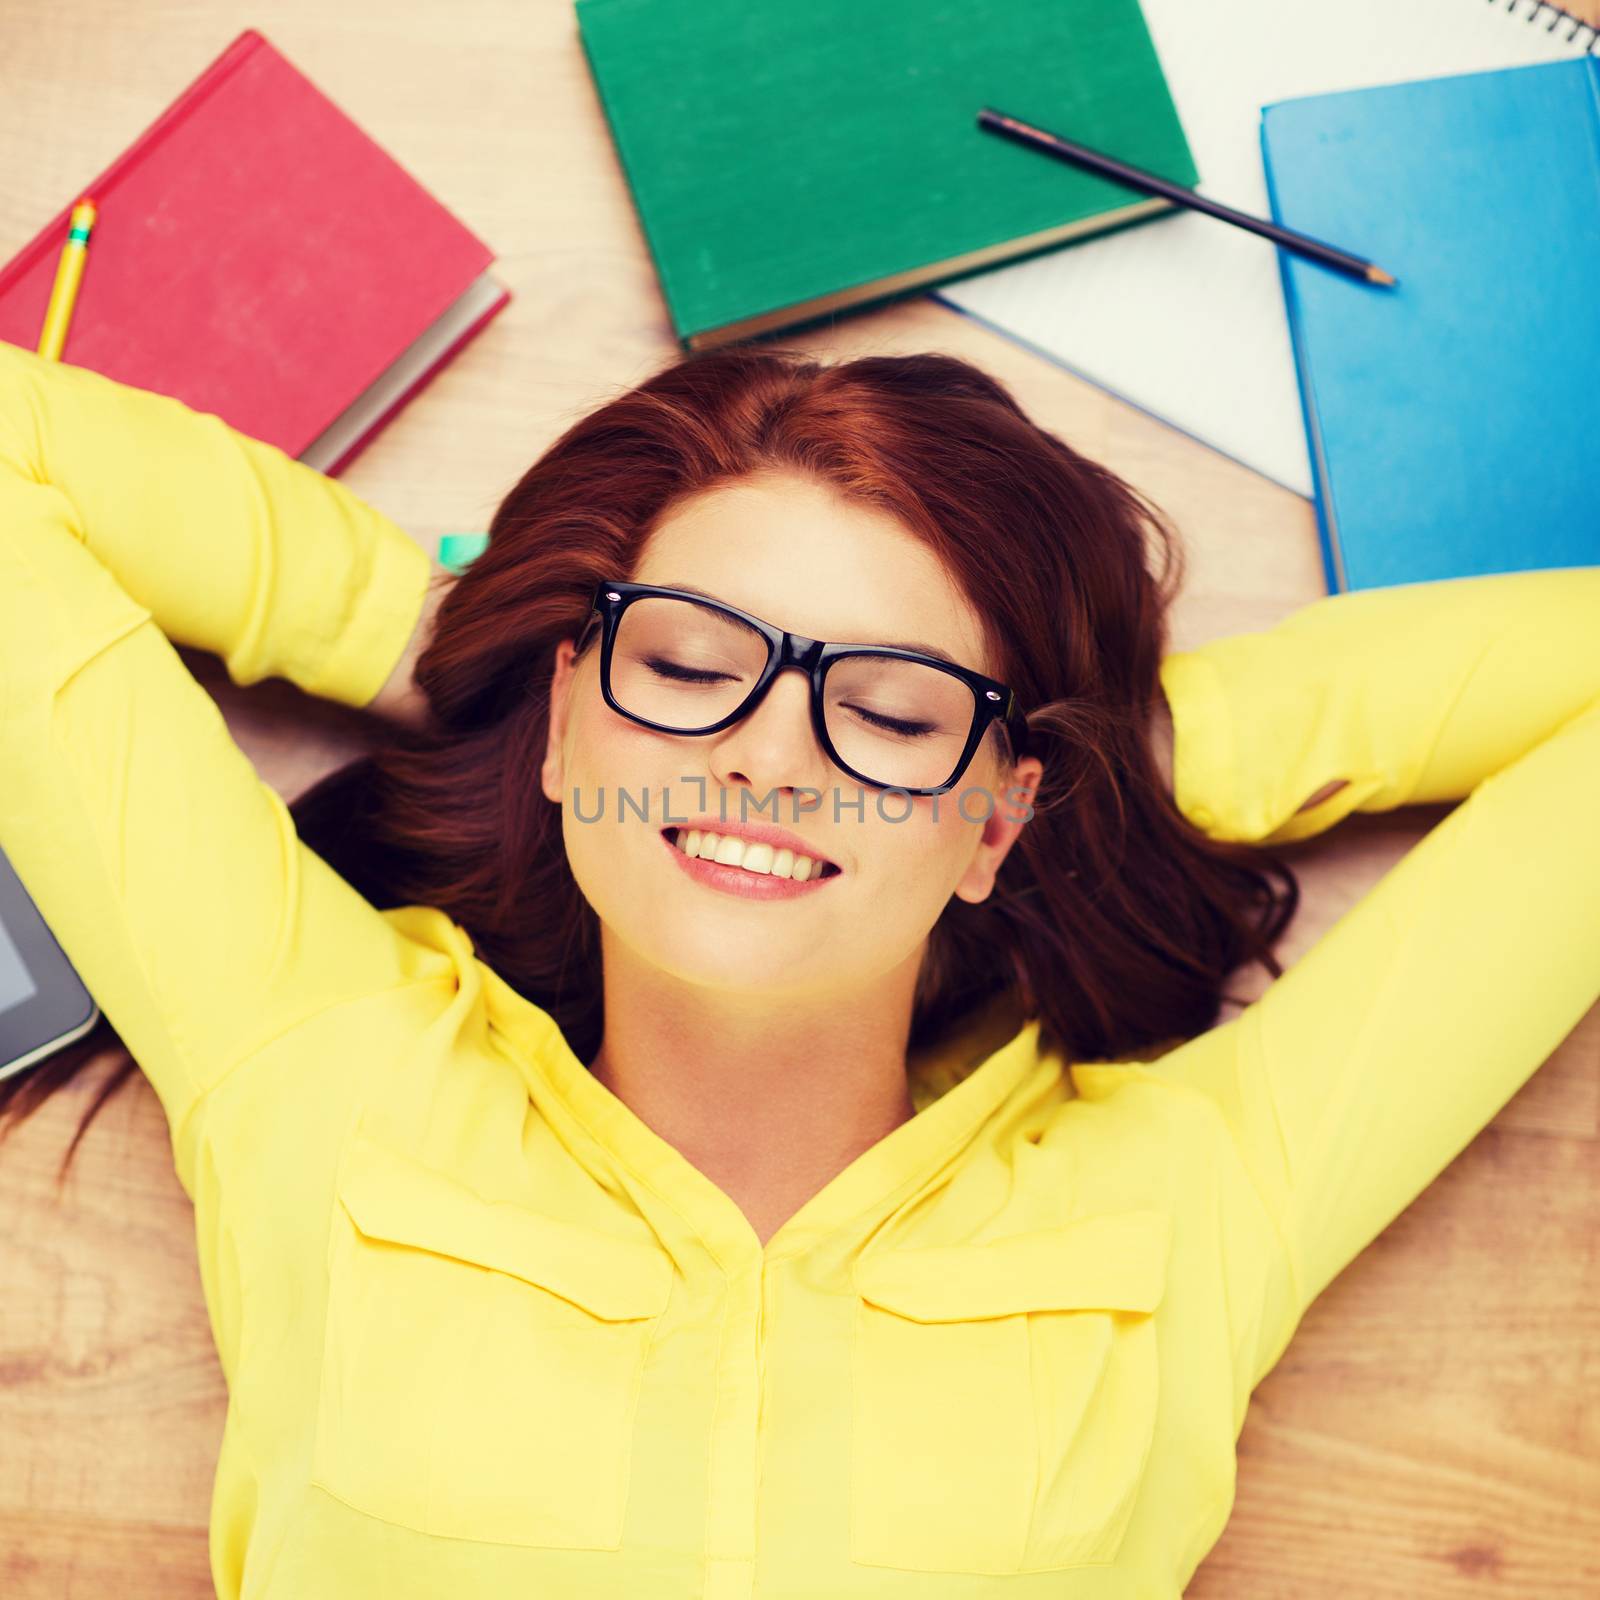 education and home concept - smiling redhead female student in eyeglasses lying on floor with closed eyes